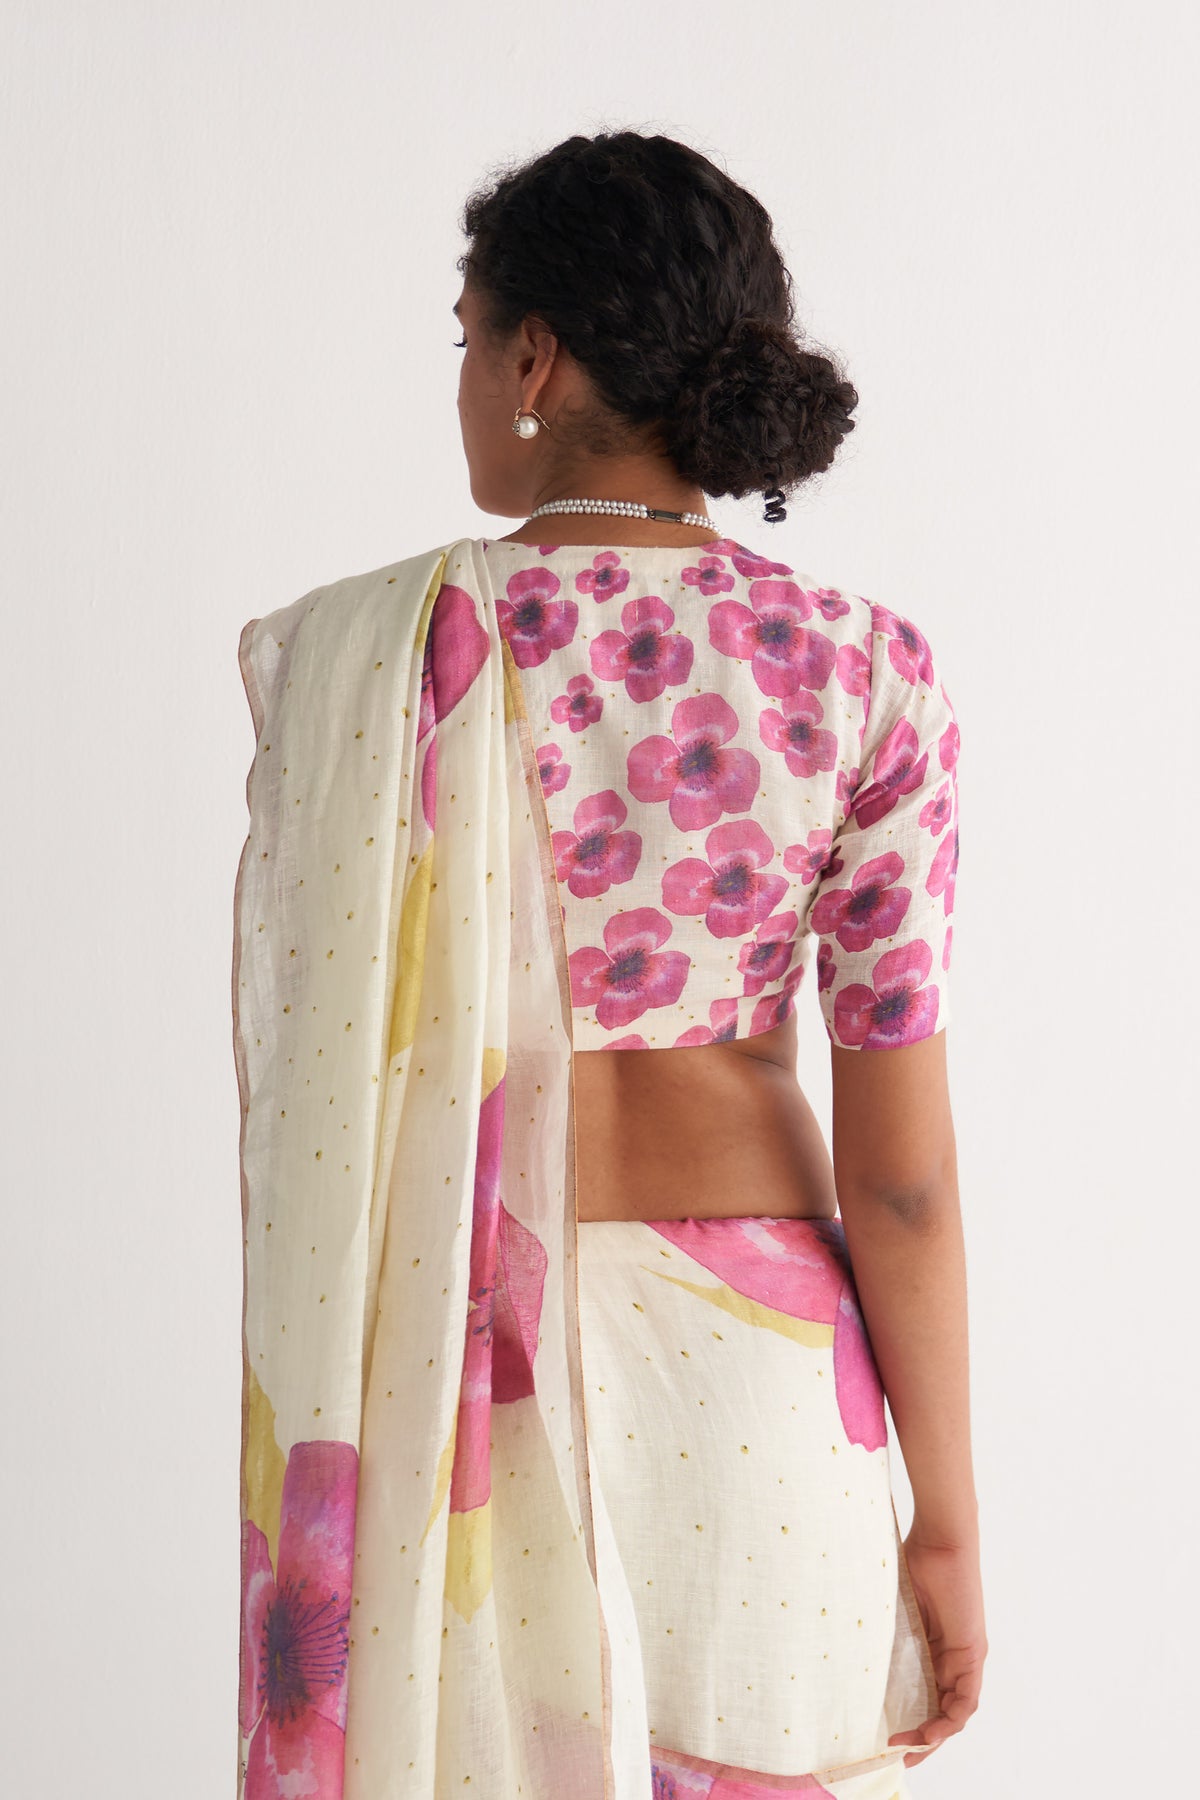 Pinkberry Floral saree With Blouse